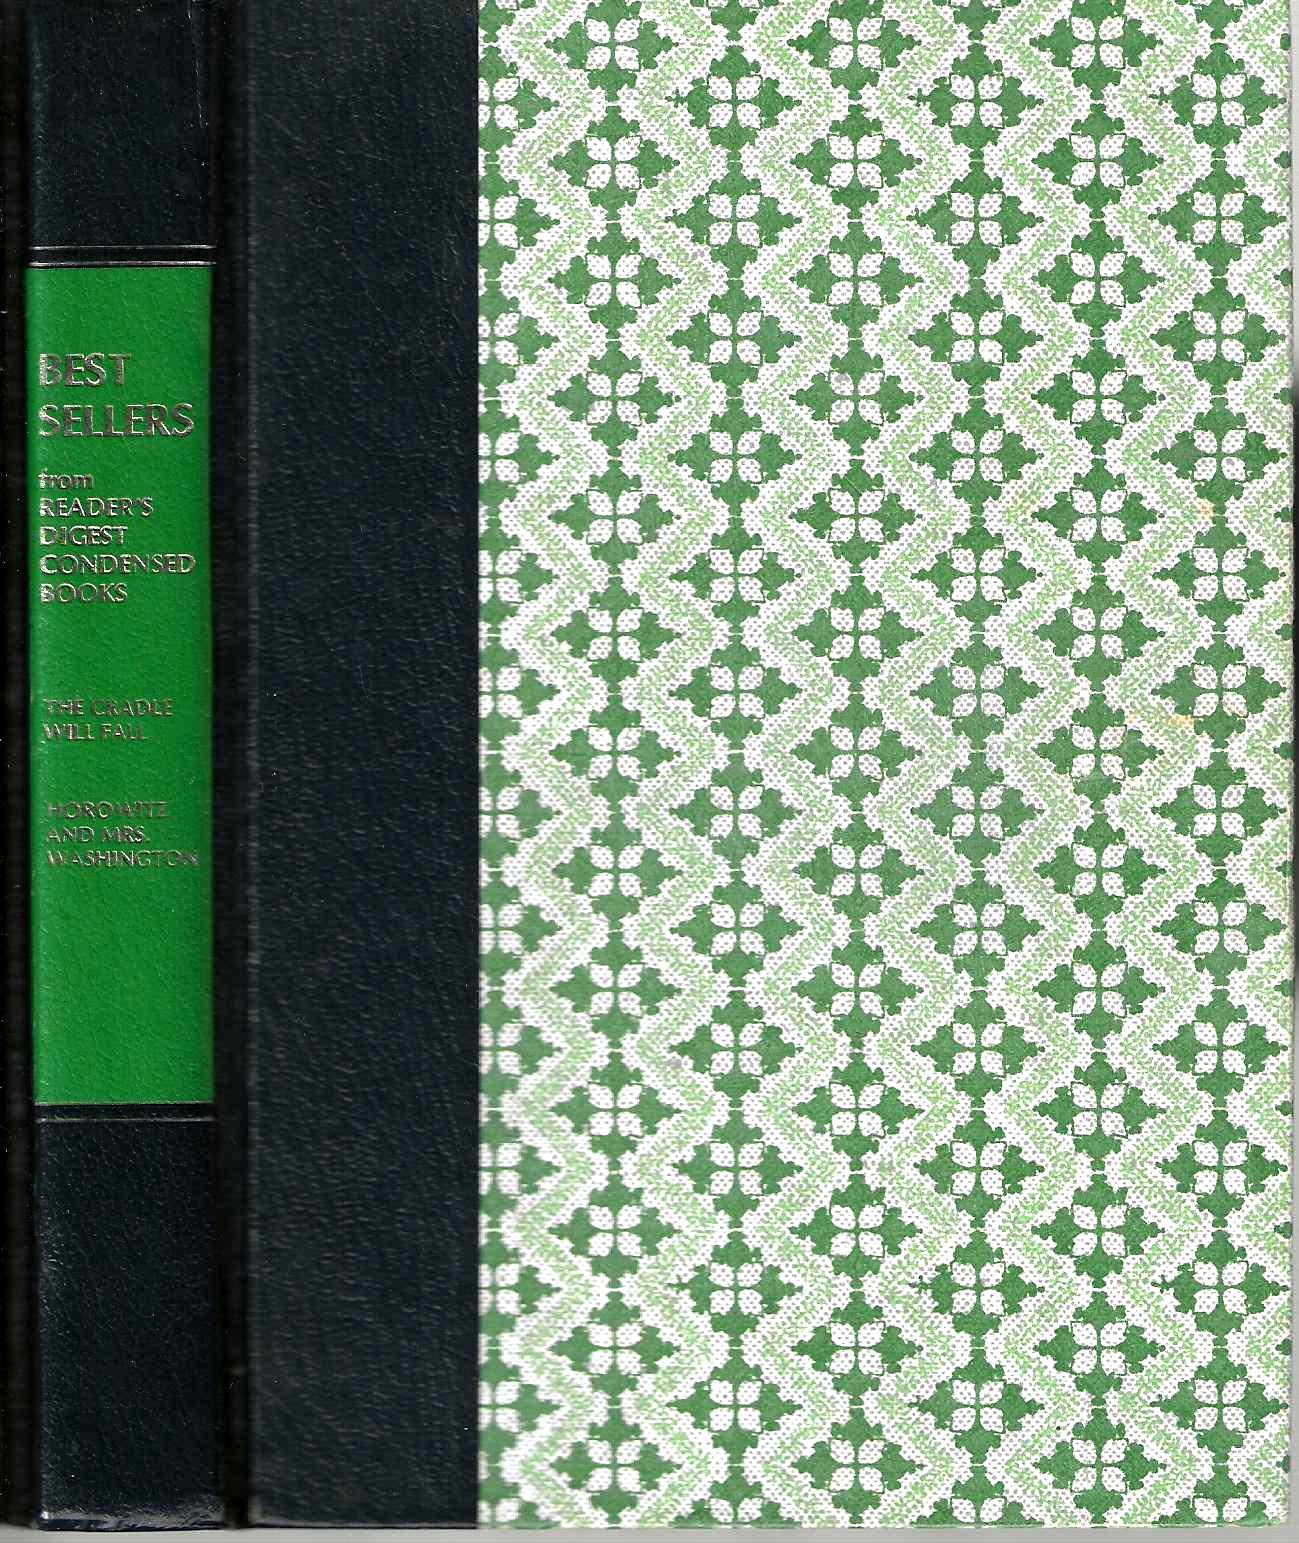 Best Sellers From Reader's Digest Condensed Books: The Cradle Will